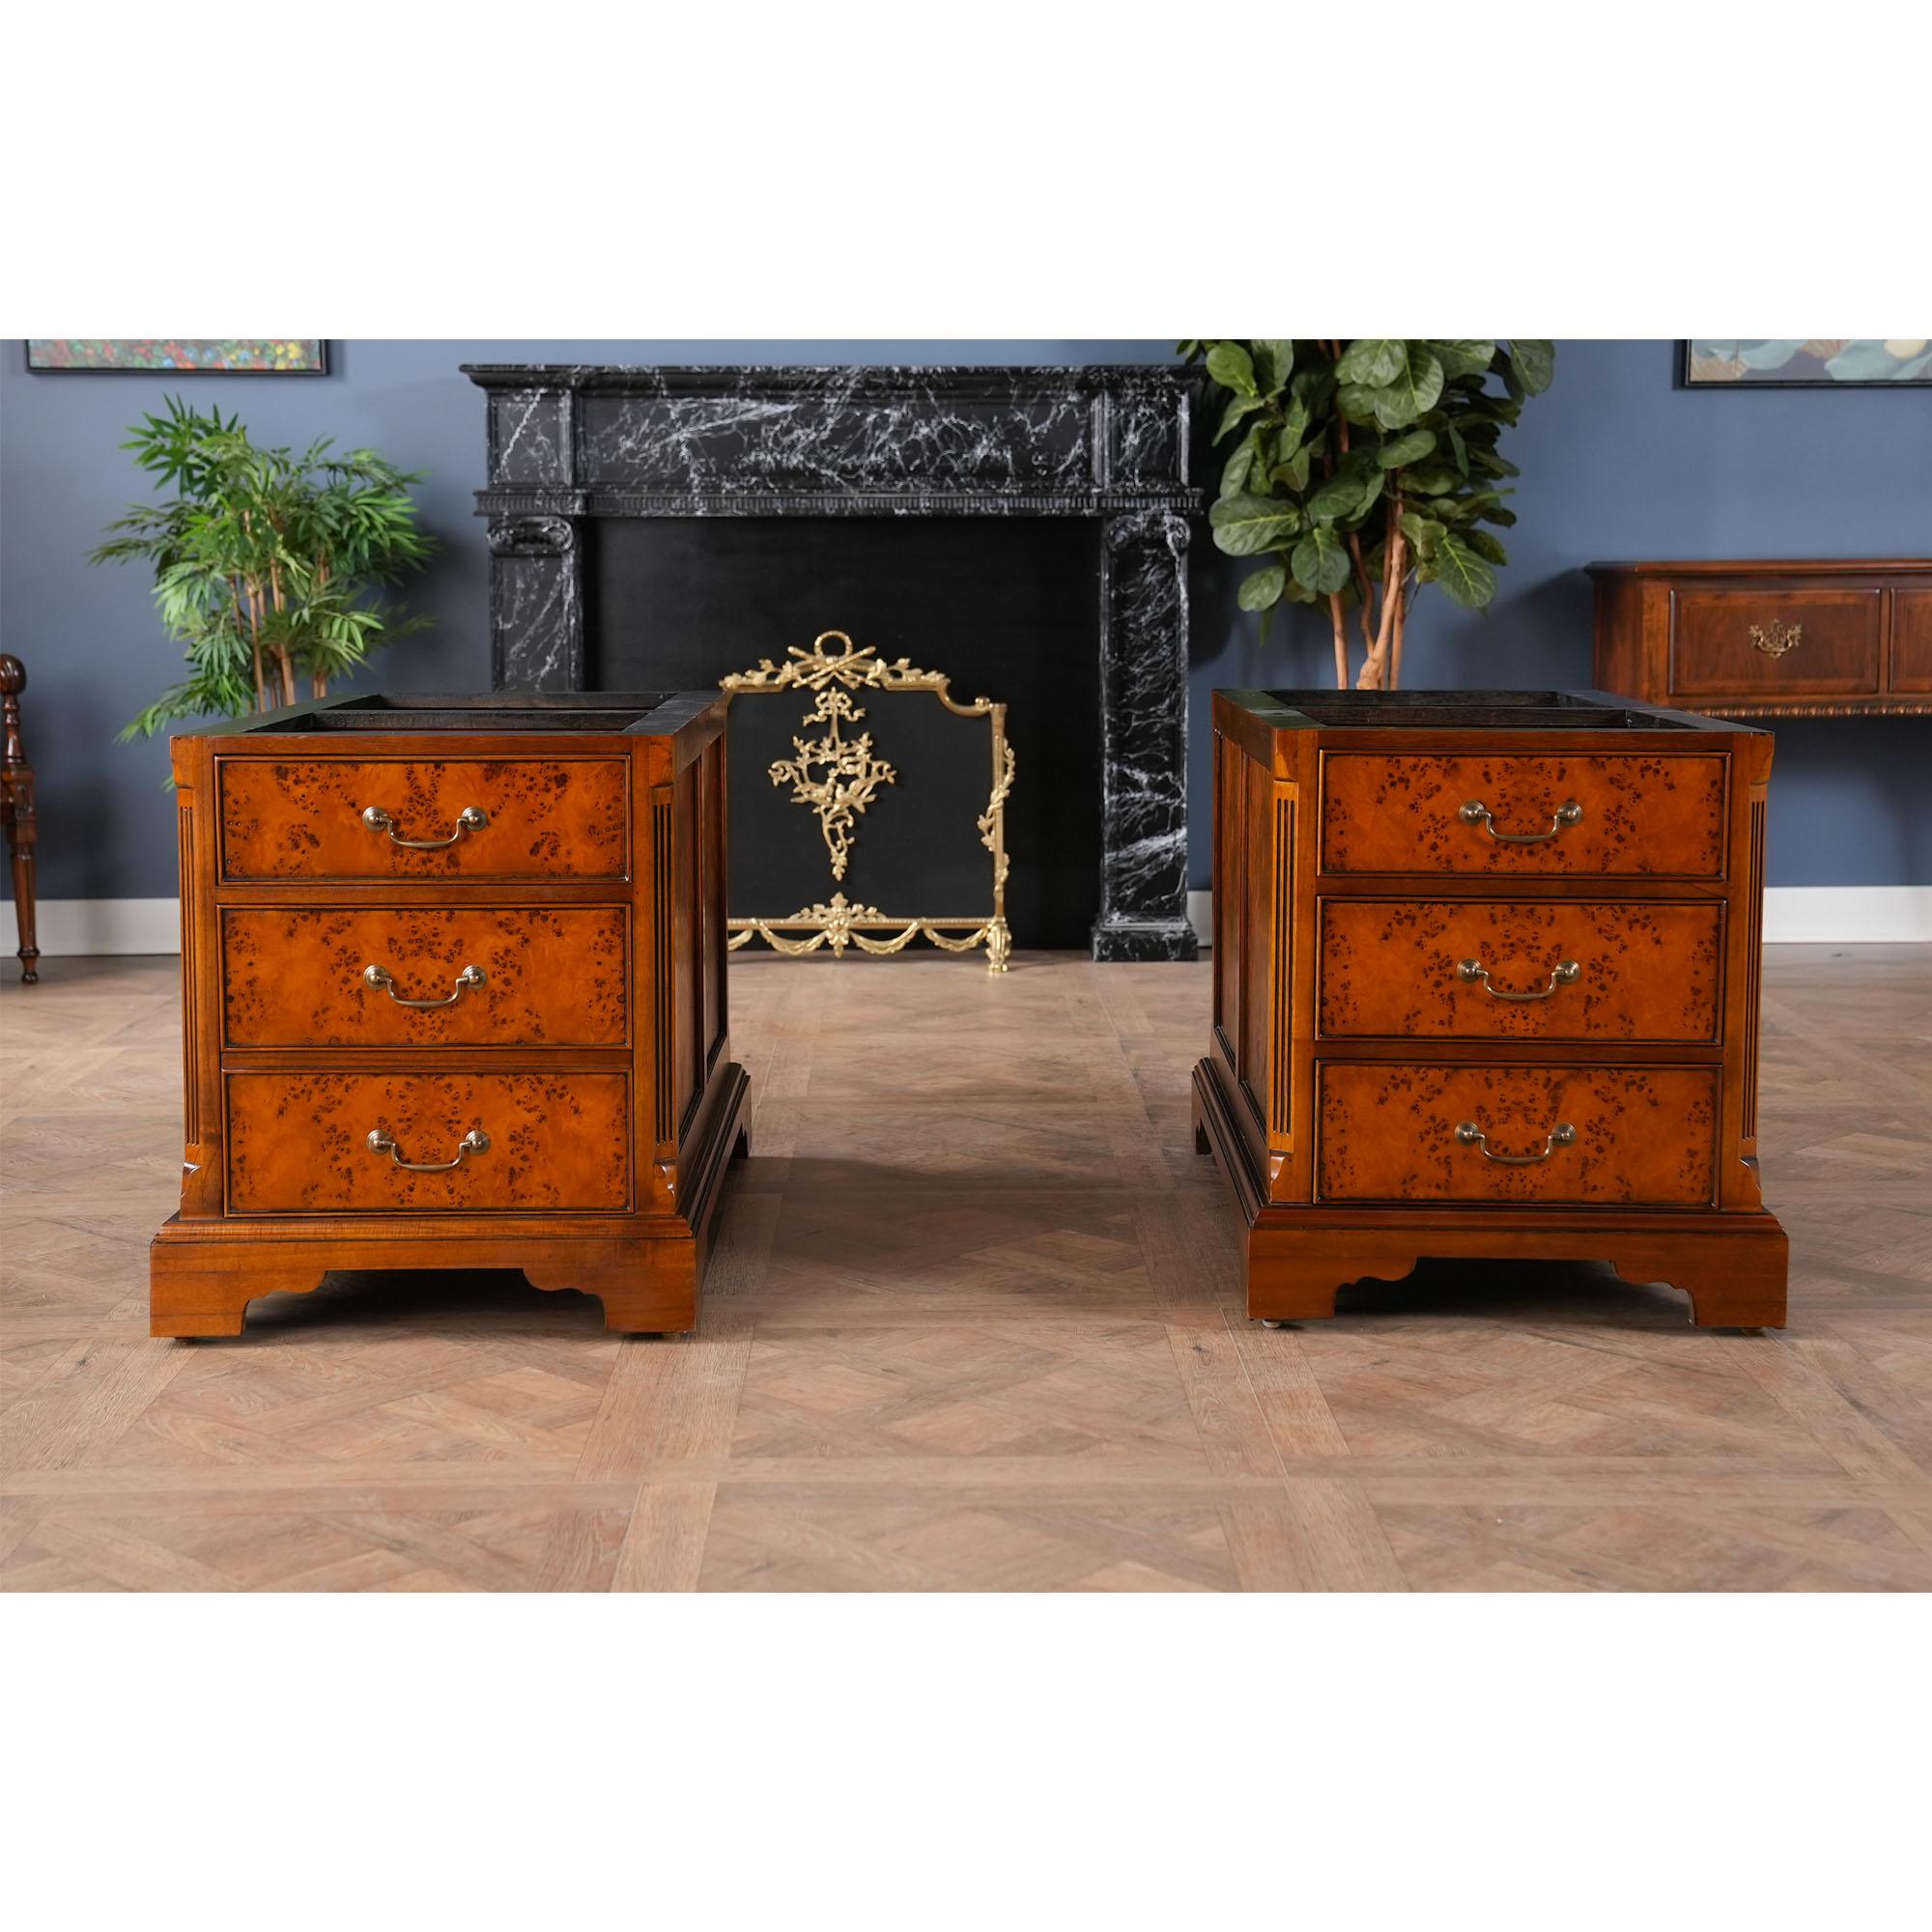 Deceptively simple at first glance the Country Estate Partners Desk by Niagara Furniture is remarkably sophisticated in its attention to detail throughout. The top section of the desk consists of a three paneled writing surface of brown full grain